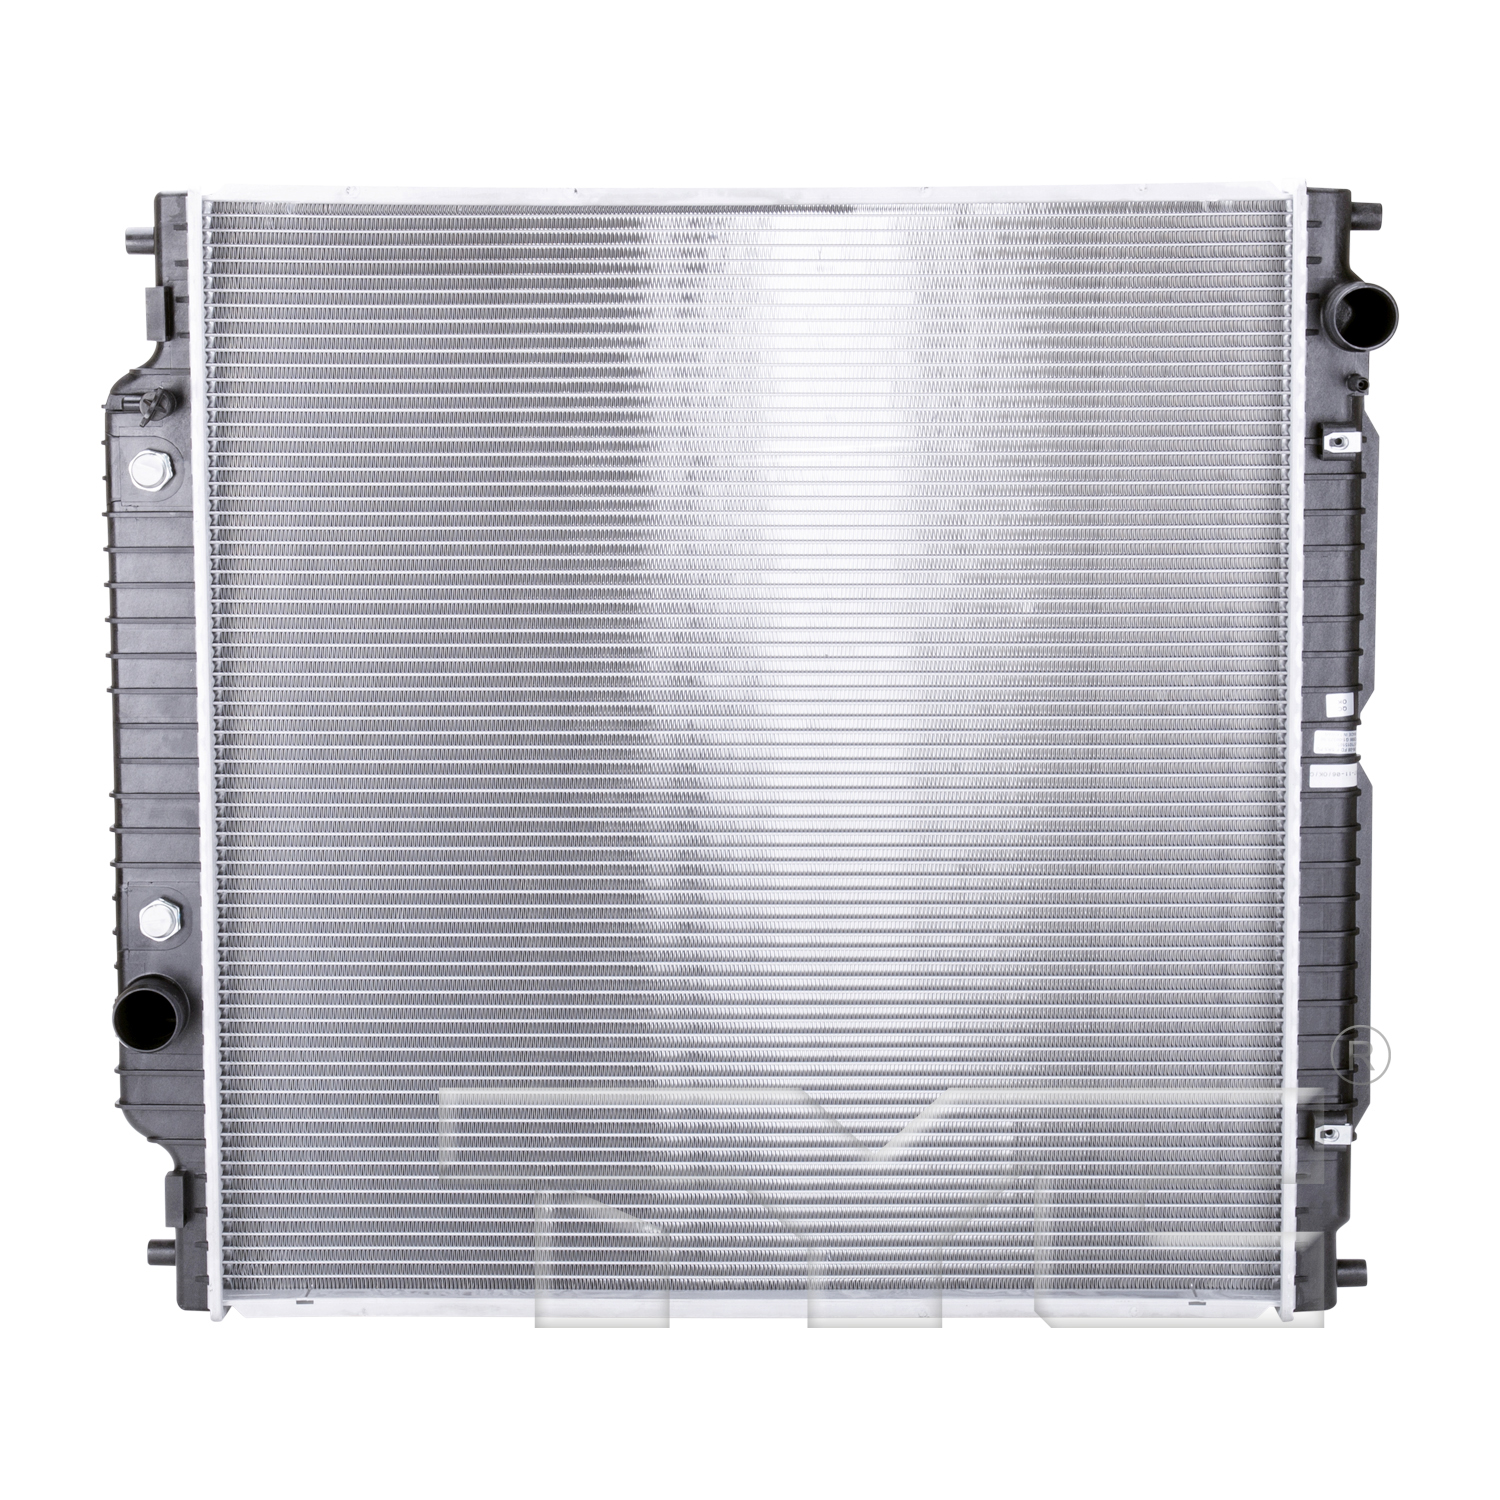 Aftermarket RADIATORS for FORD - F-350 SUPER DUTY, F-350 SUPER DUTY,06-07,Radiator assembly